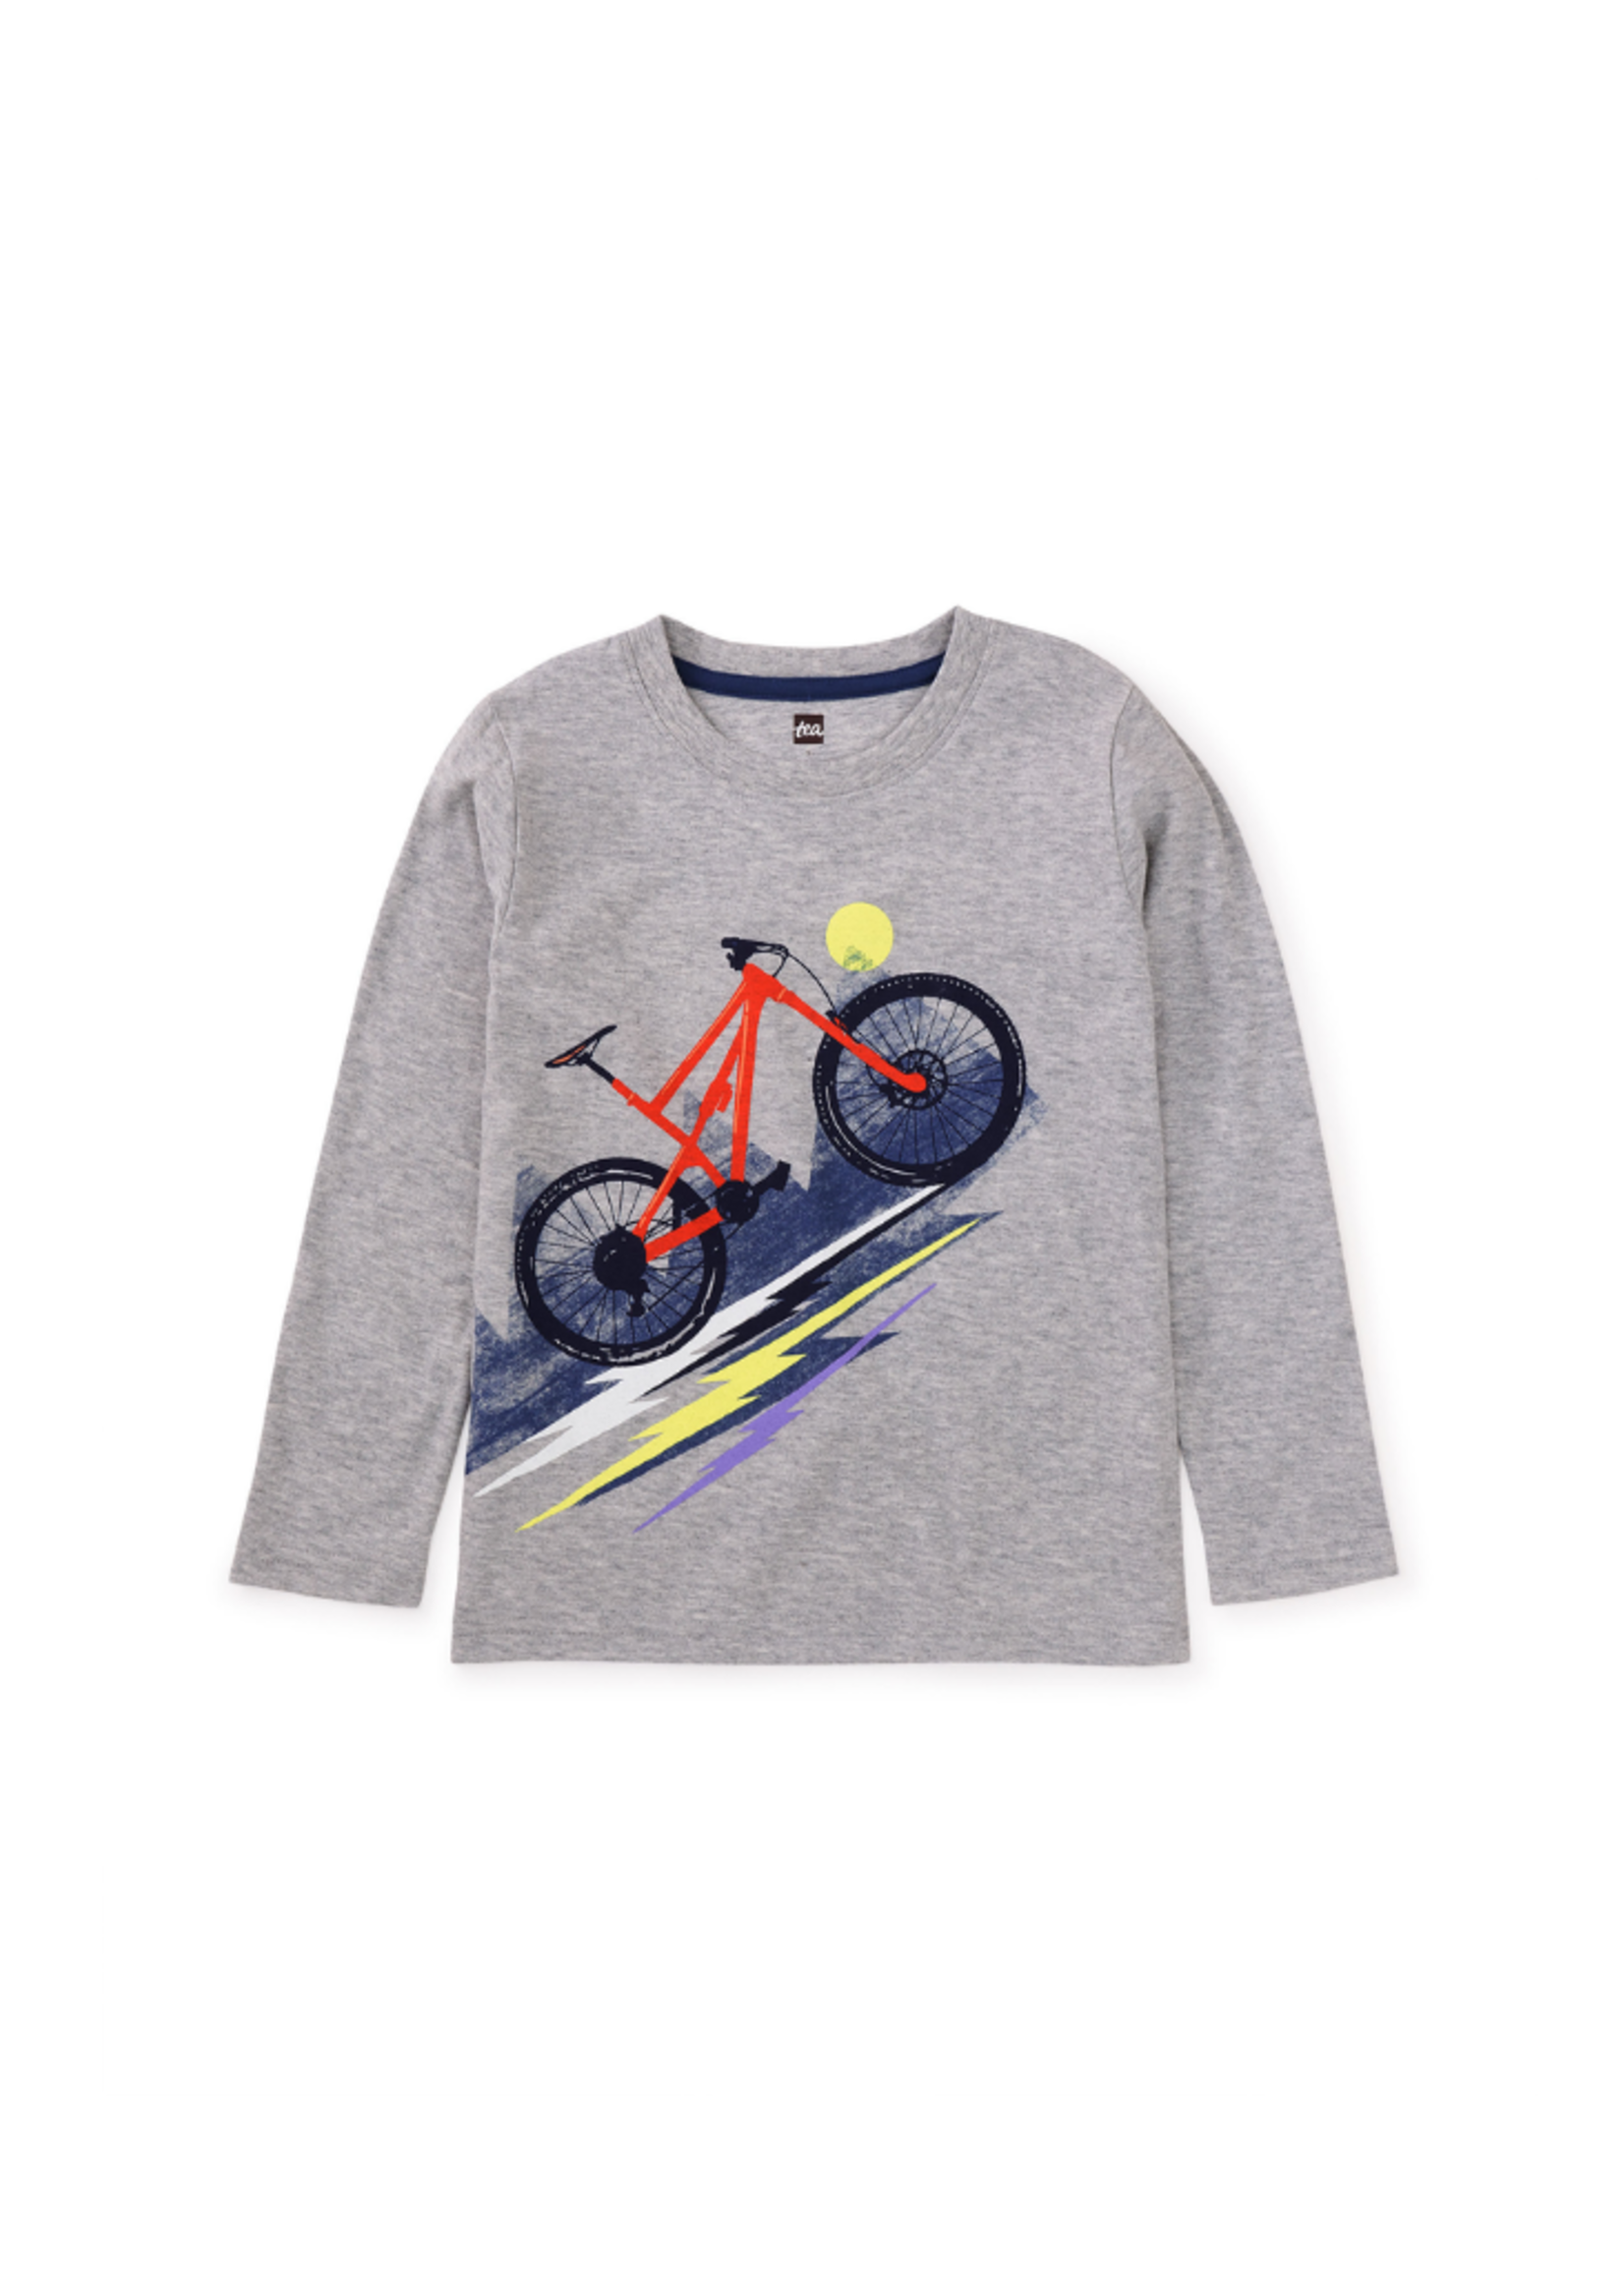 Tea Collection Uphill Ride Graphic Tee